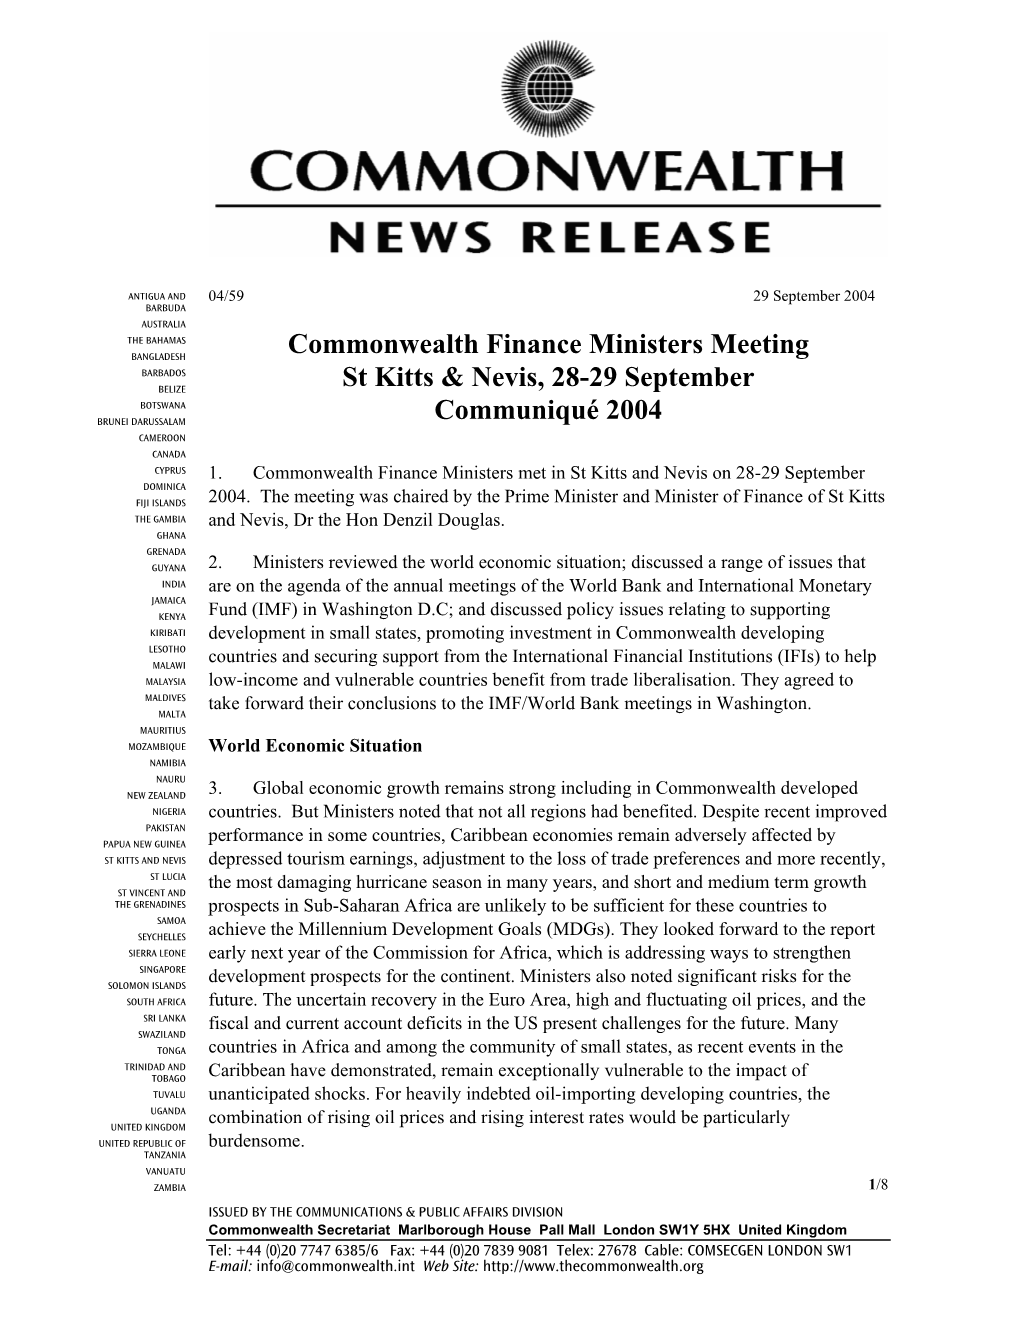 Commonwealth Finance Ministers Meeting St Kitts & Nevis, 28-29